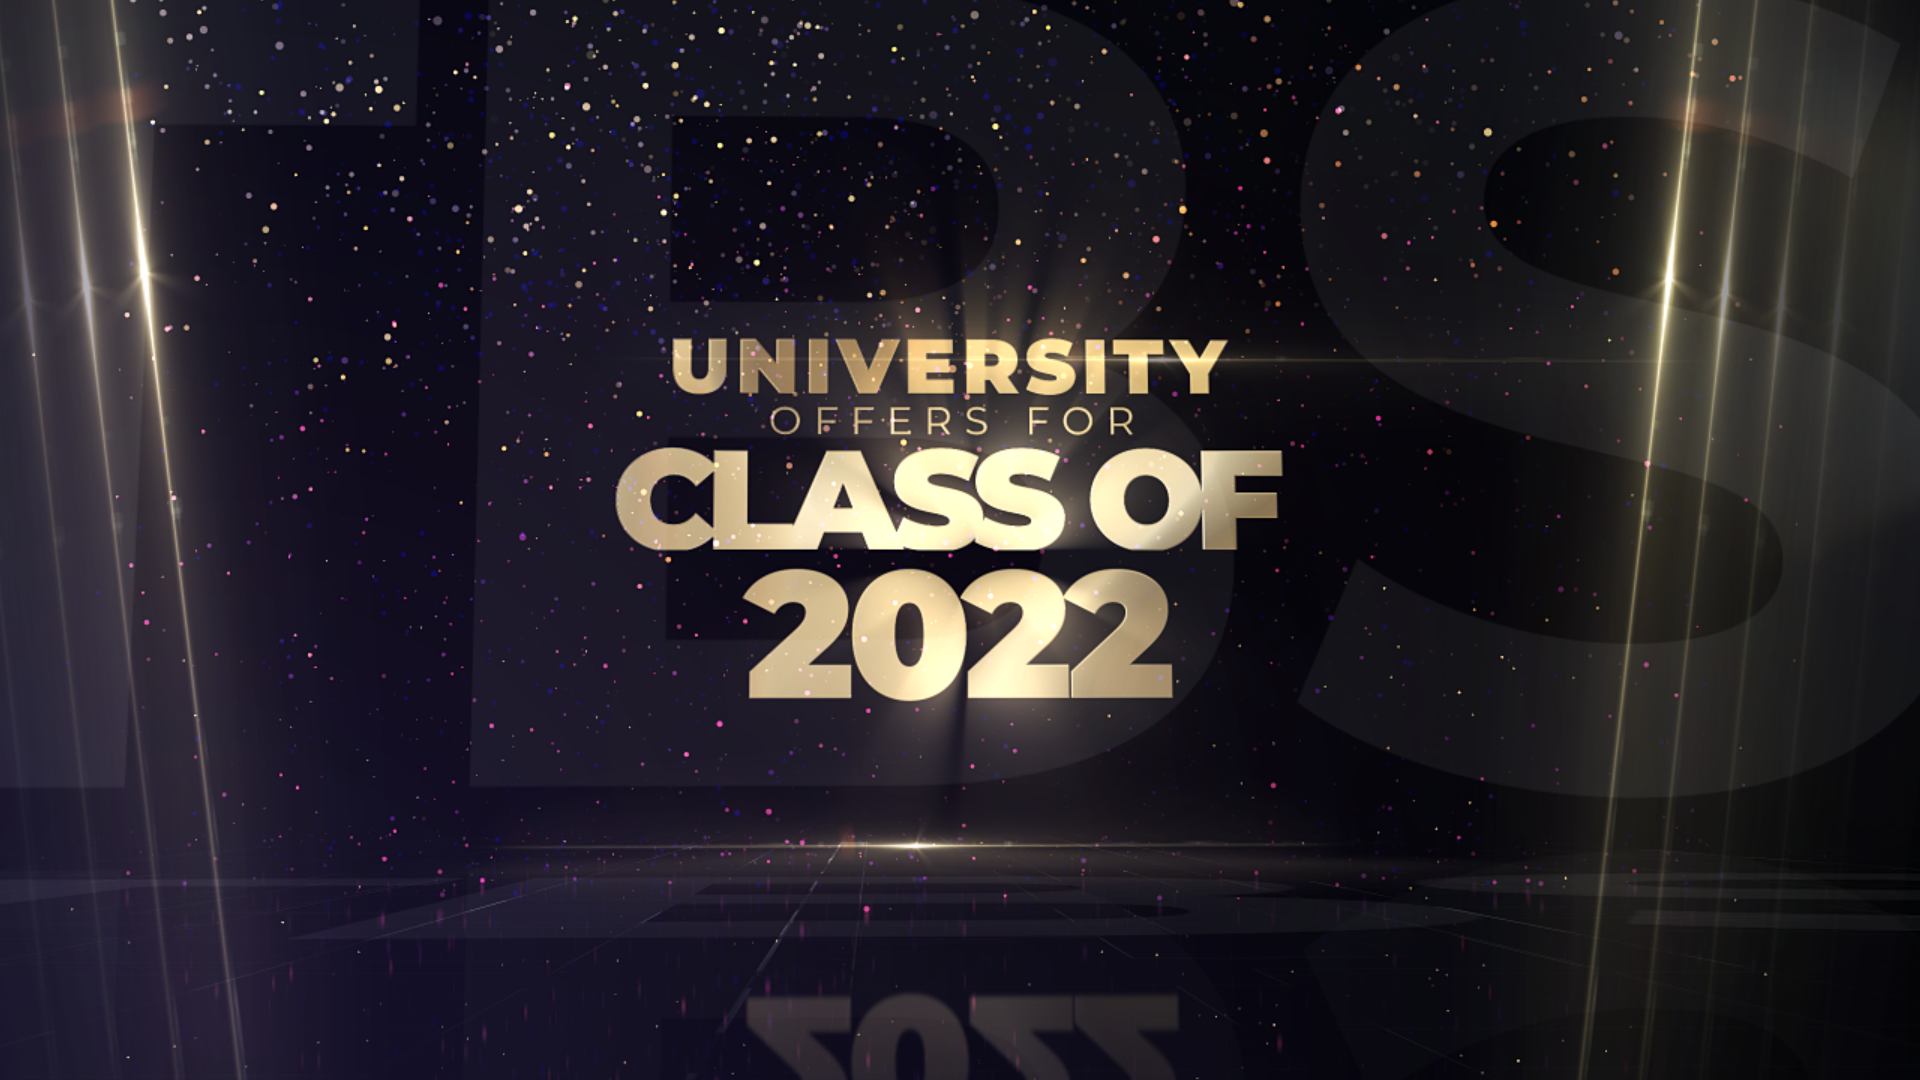 University Offers for Class of 2022